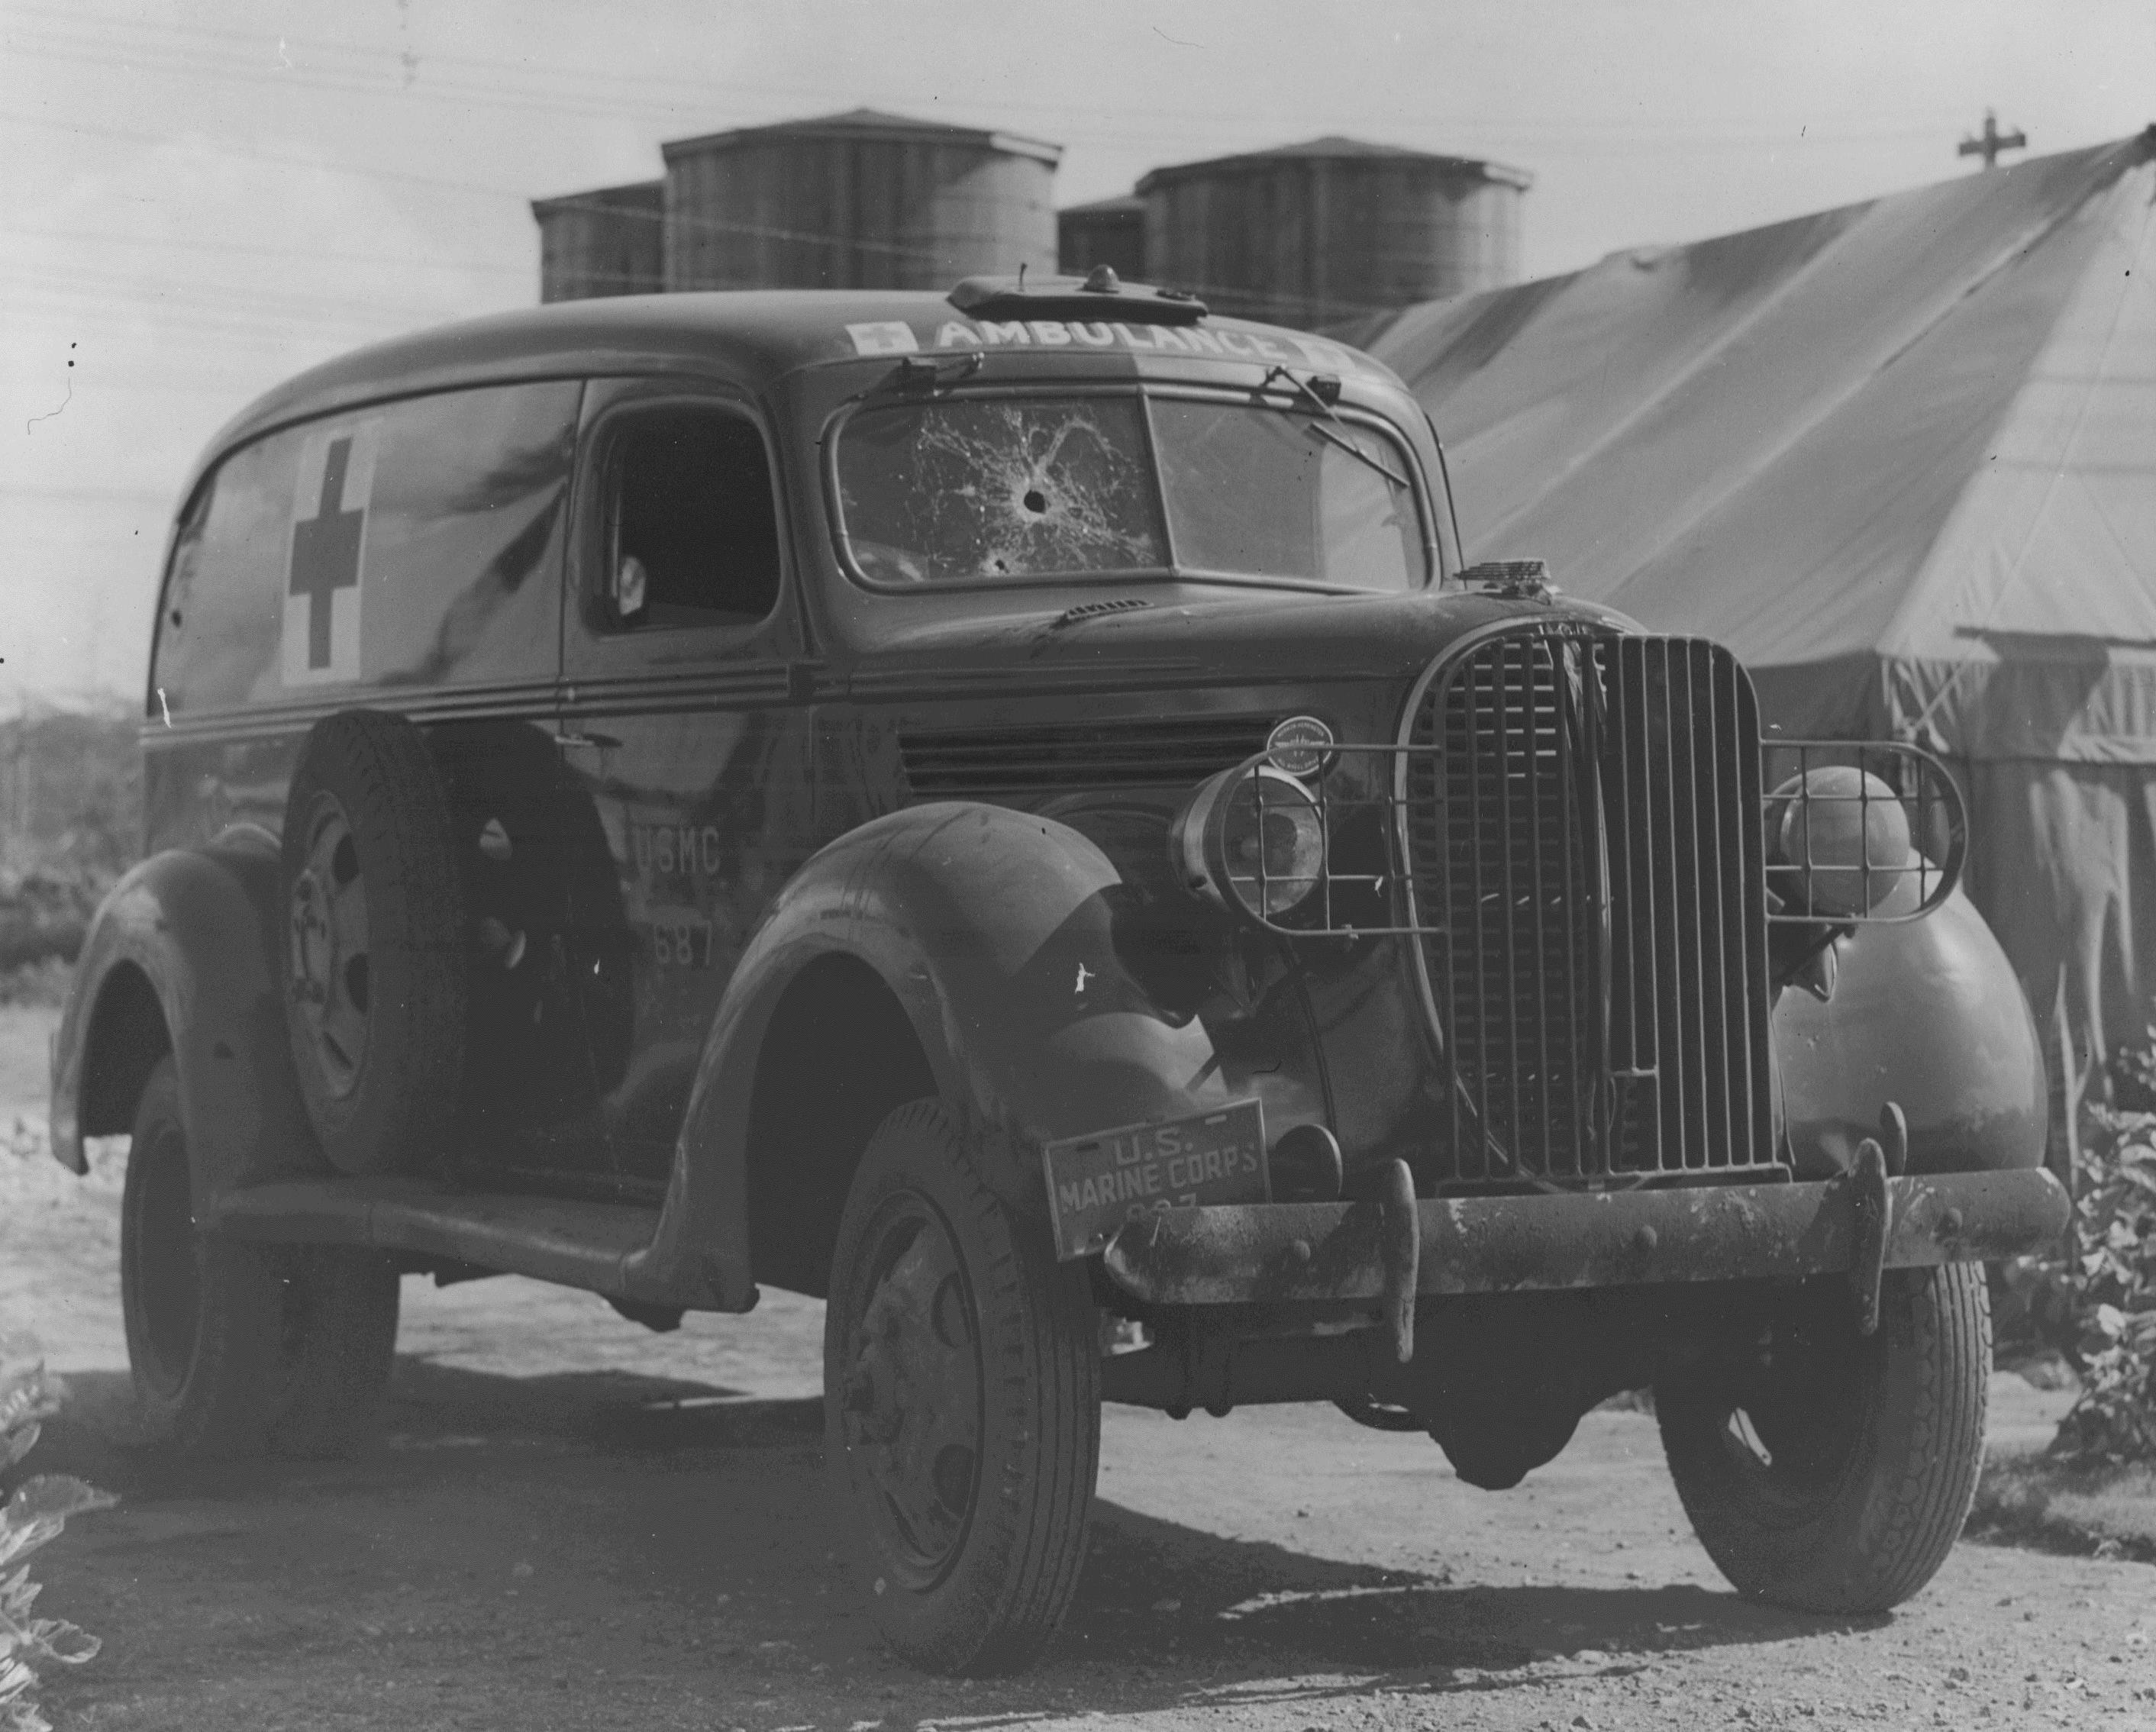 Destroyed 1938 Ford ambulance stationed at Ewa Field, Oahu, US Territory of Hawaii, Dec 1941